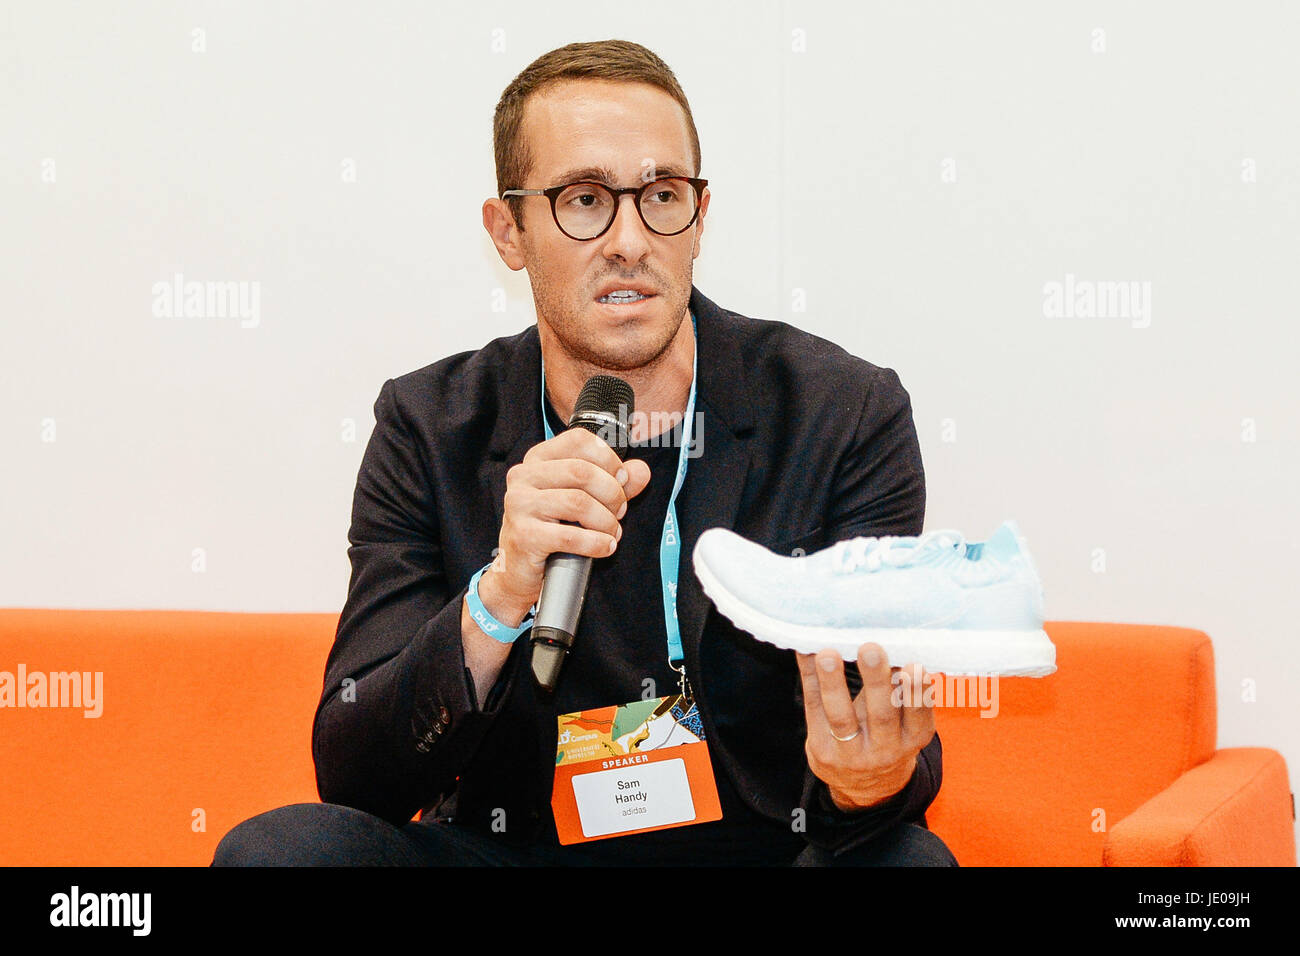 BAYREUTH/GERMANY - JUNE 21: Sam Handy (adidas) shows a new-developed  sportshoe, which is made with biofabrics (spidersilk) during the DLD Campus  event at the University of Bayreuth on June 21th, 2017 in